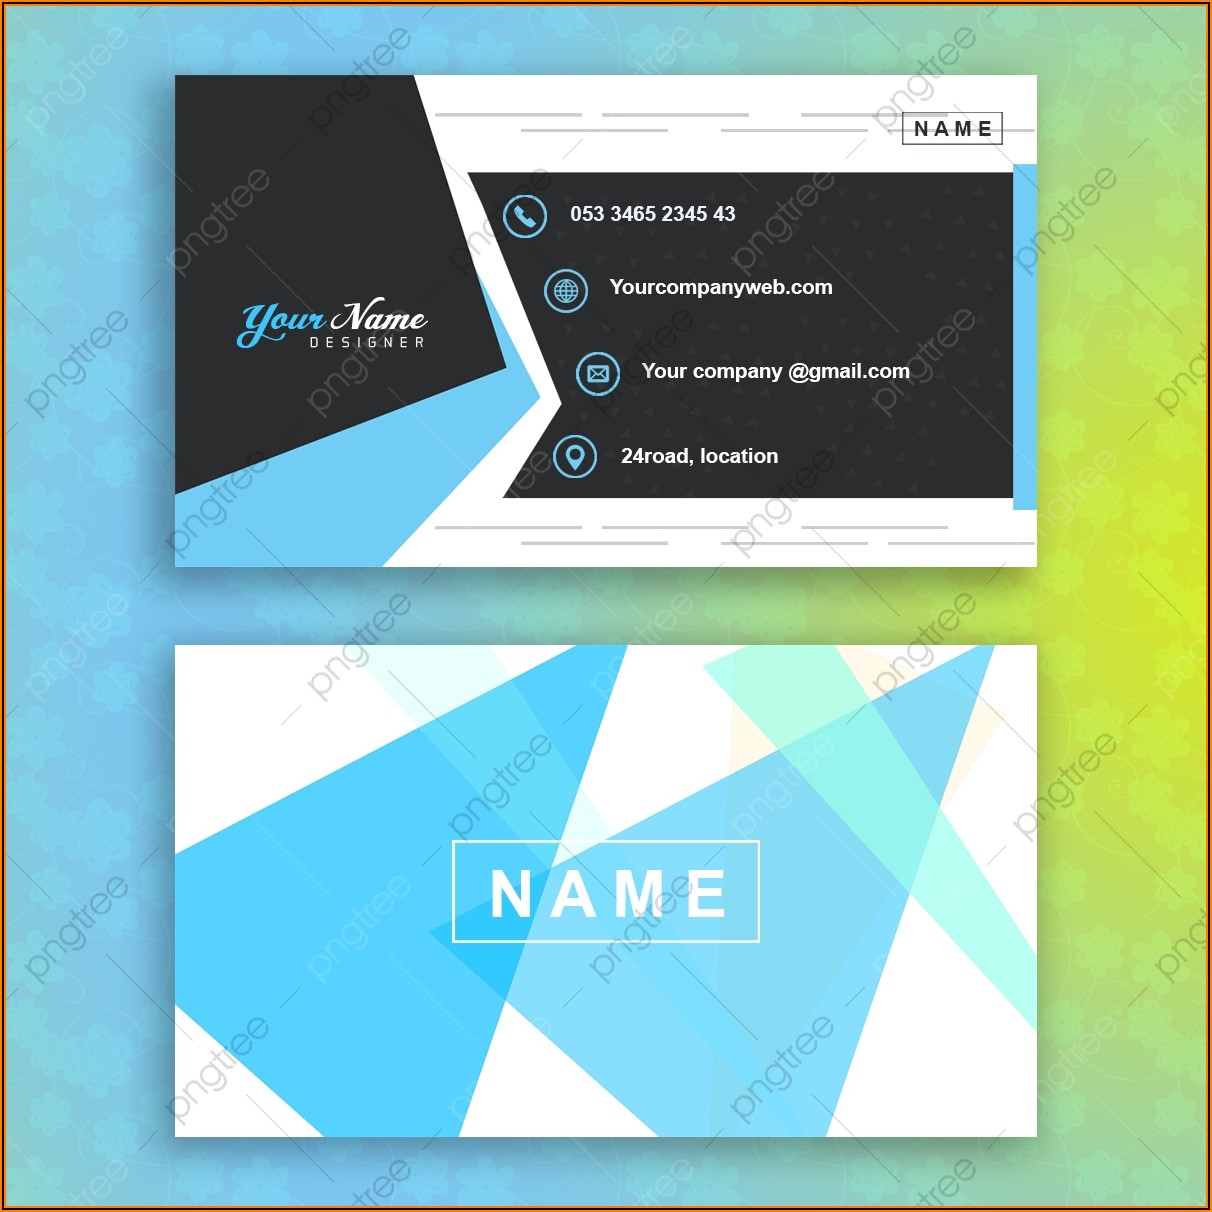 2 Sided Business Card Template